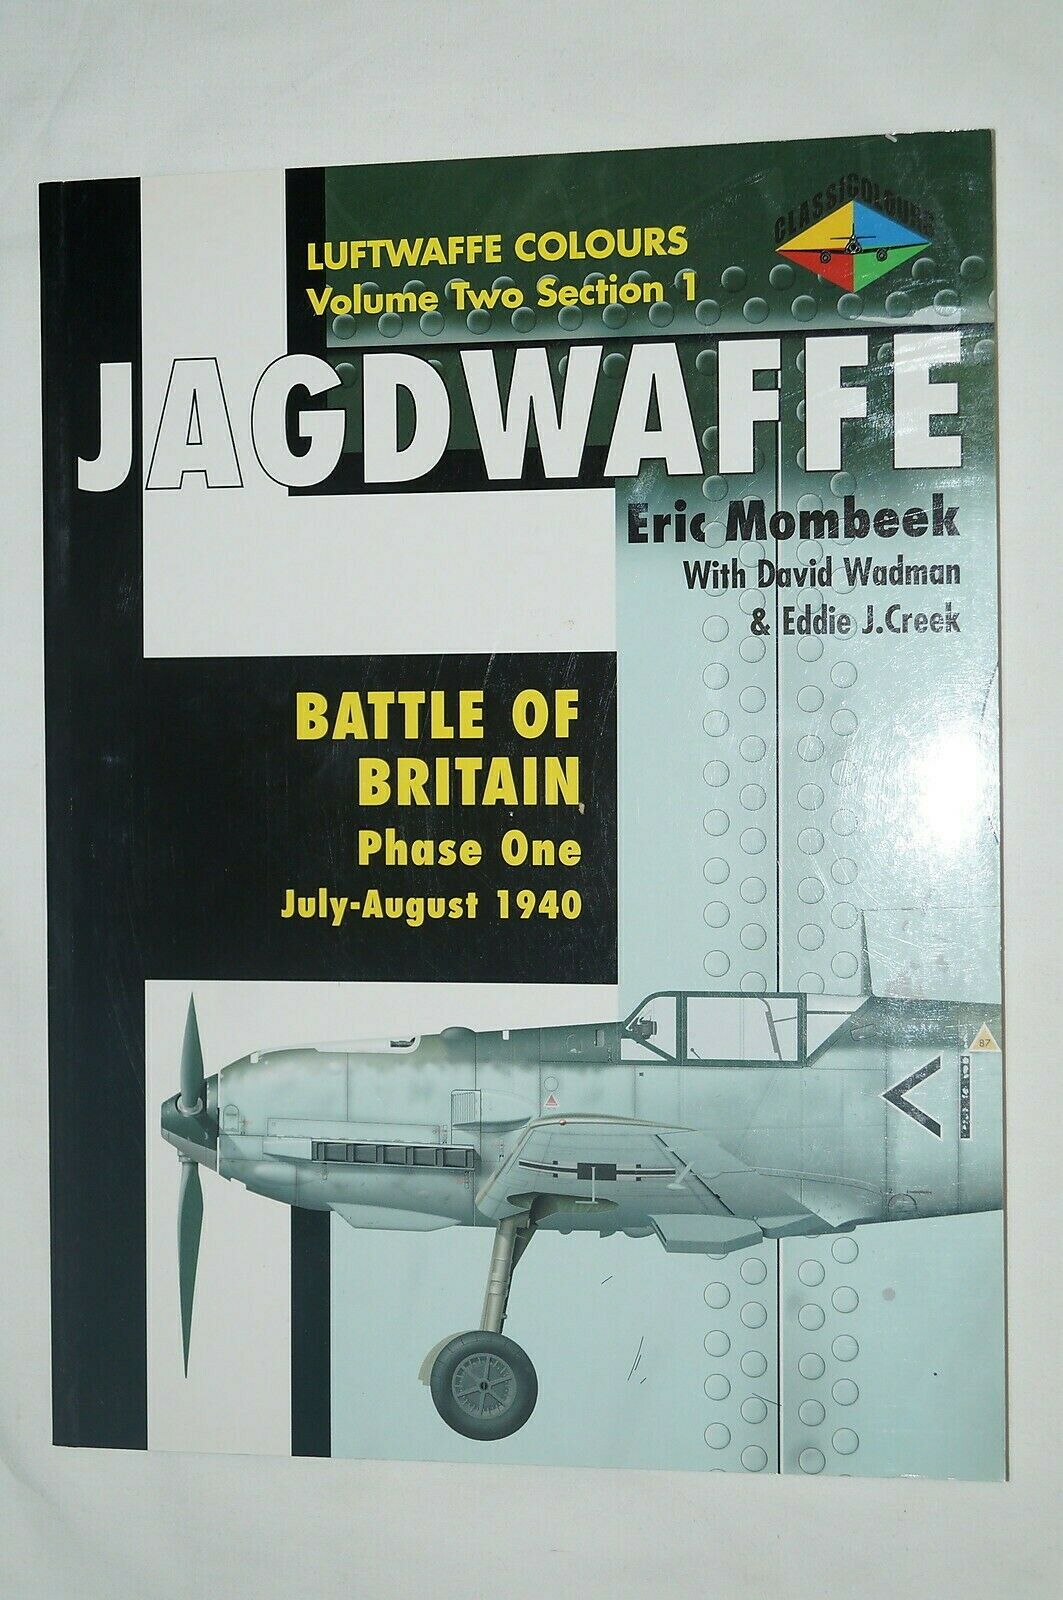 Ww2 German Jagdwaffe Battle Of Britain Phase 1 1940 Reference Book